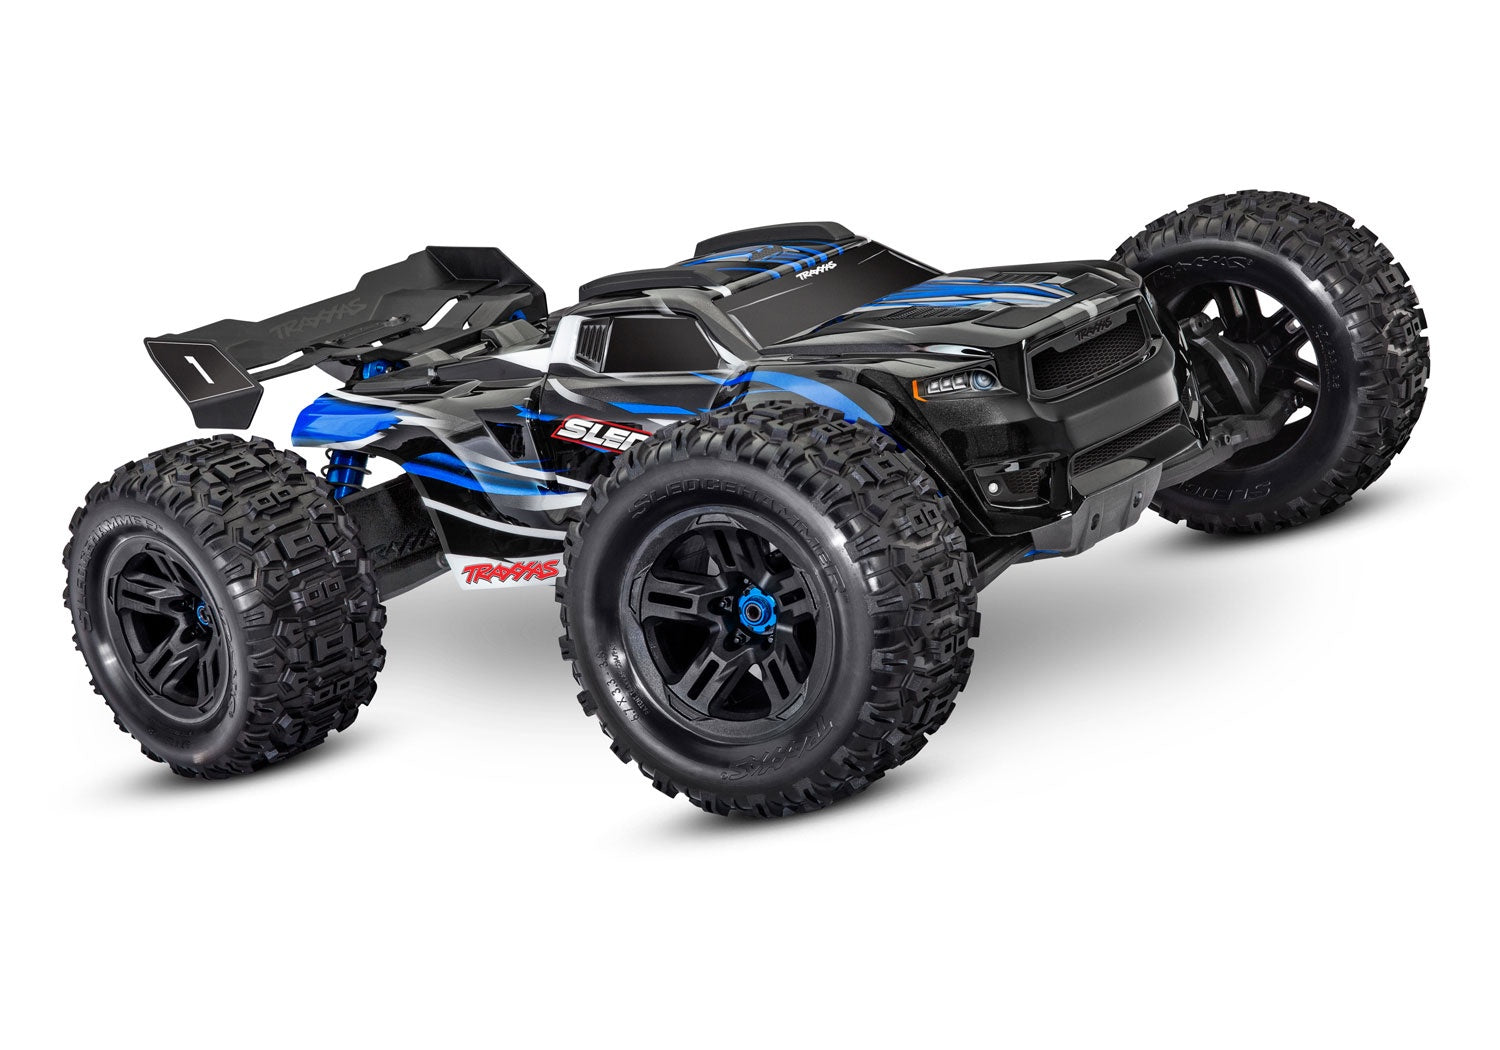 Blue Sledge®: 1/8 Scale 4WD Brushless Electric Monster Truck with TQi 2.4GHz Traxxas Link™ Enabled Radio System and Traxxas Stability Management (TSM)®